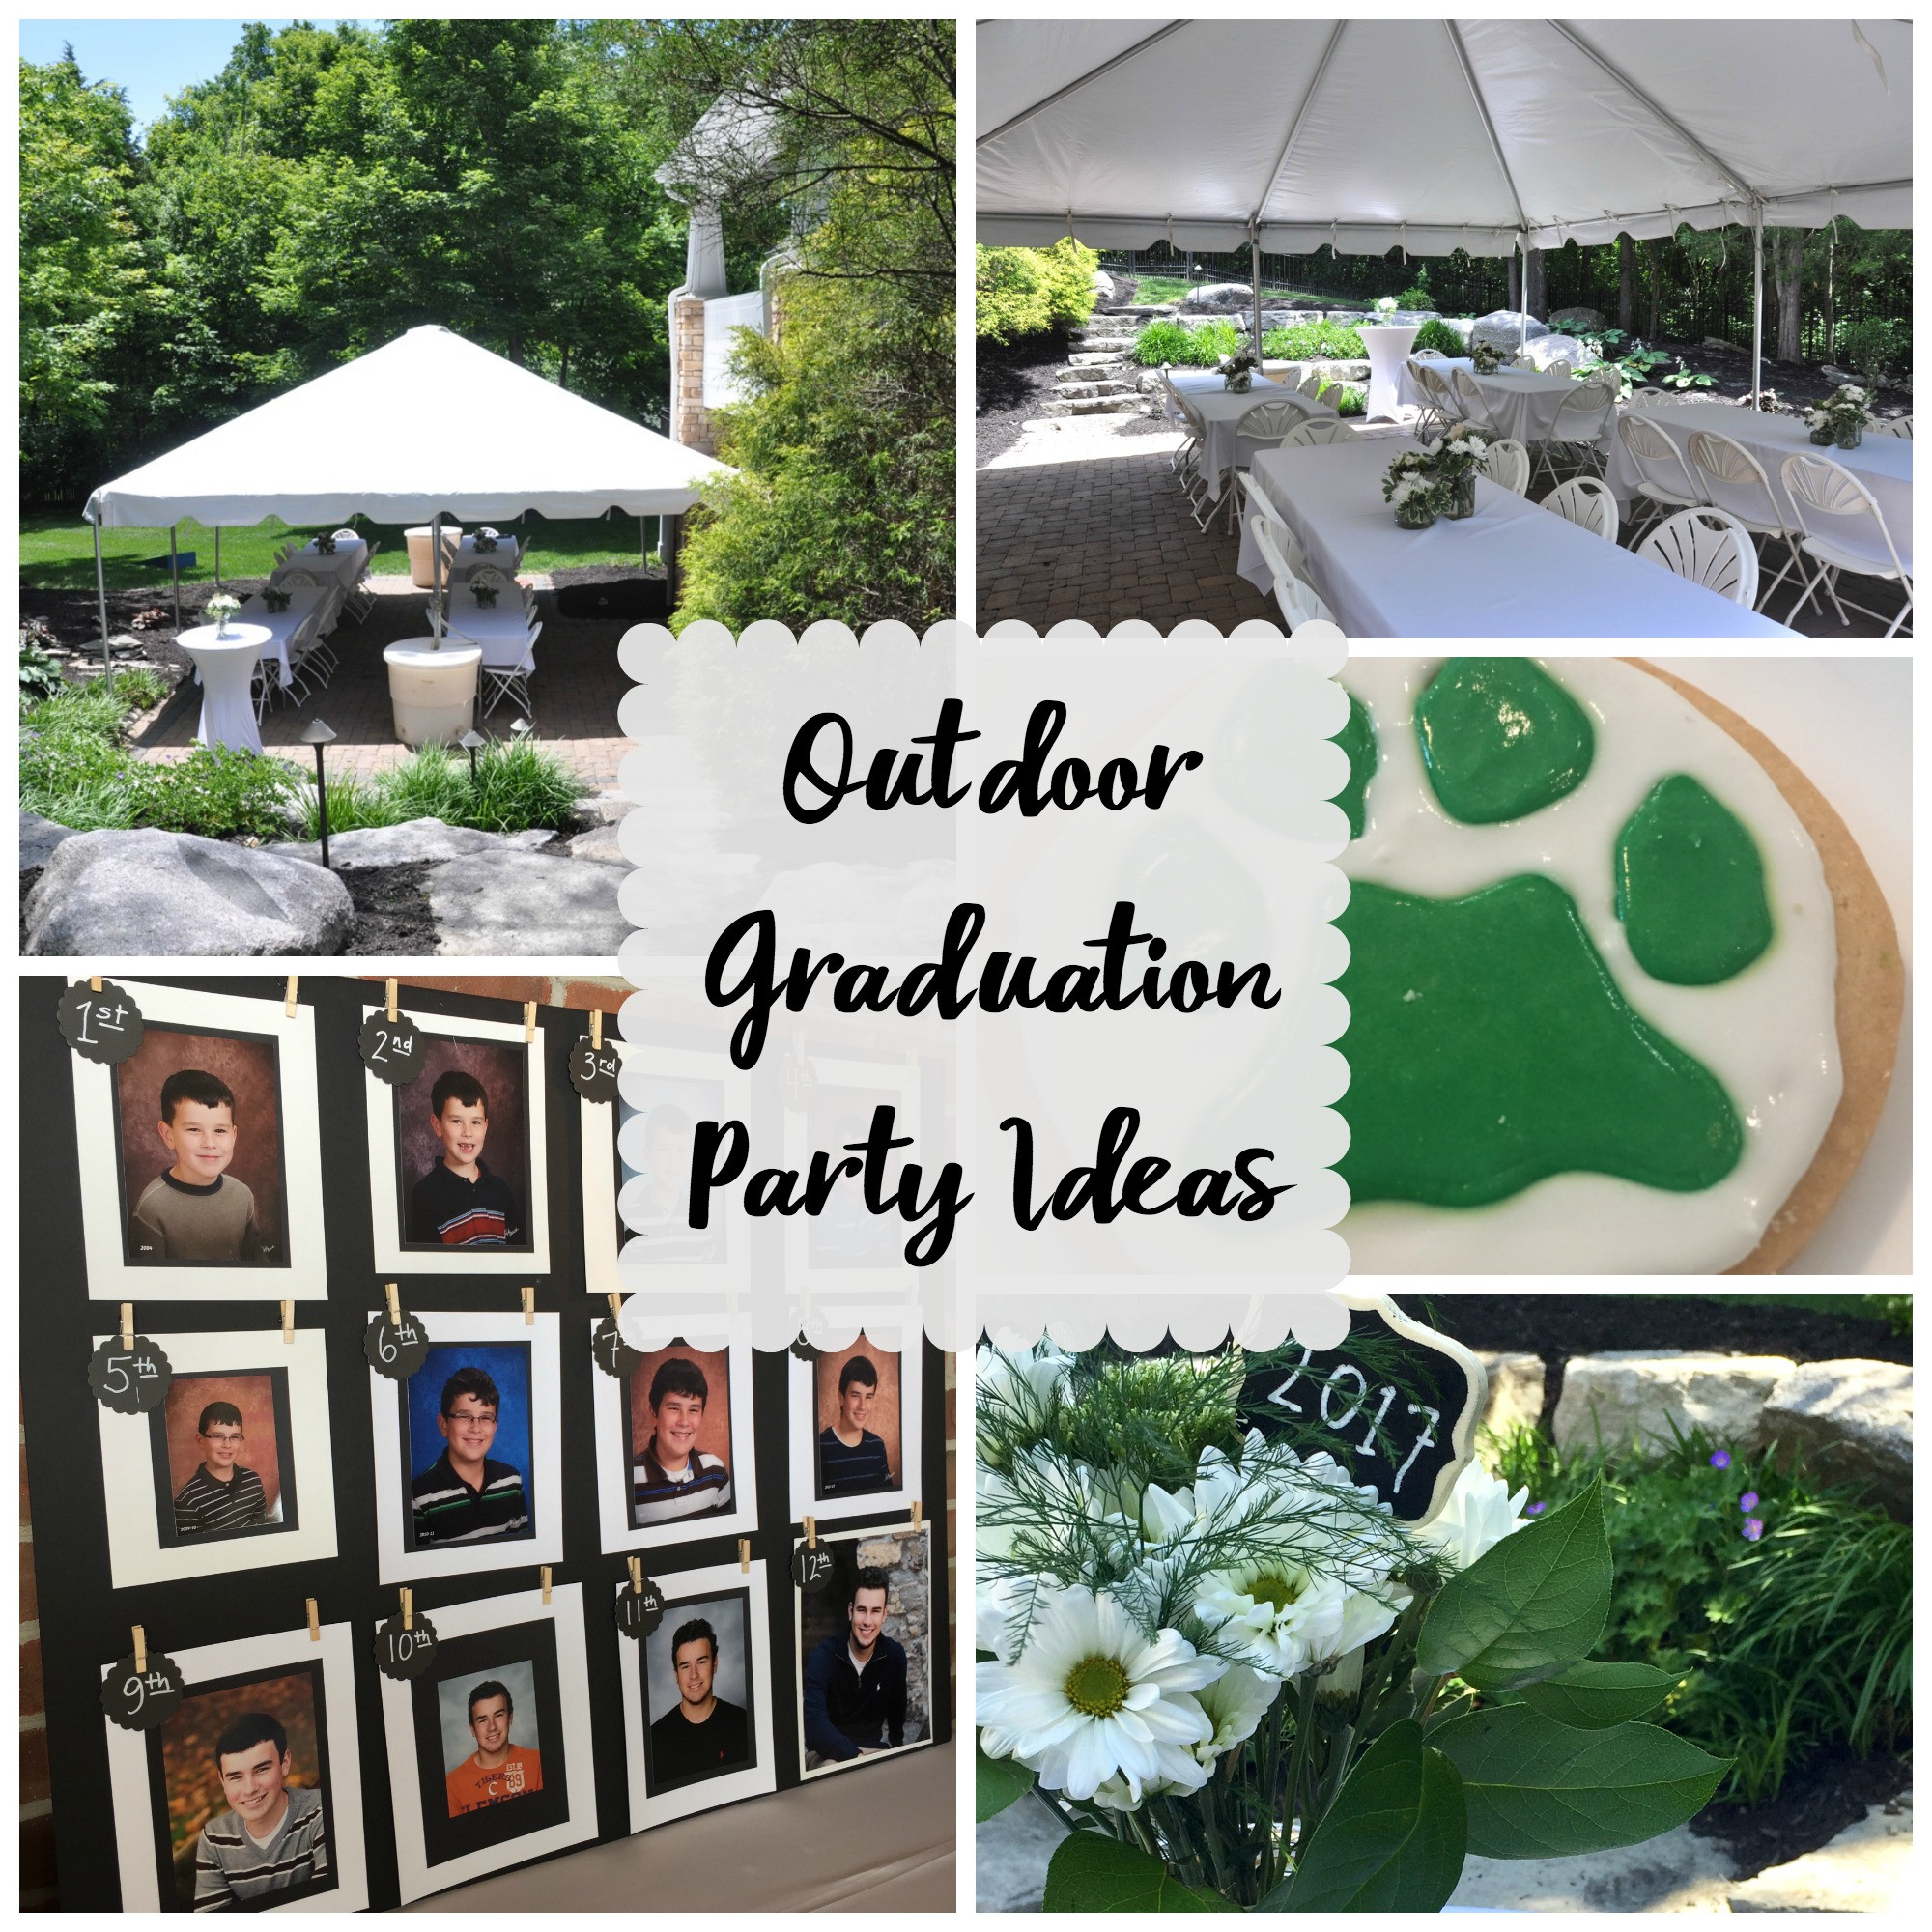 Ideas For Senior Graduation Party
 Outdoor Graduation Party Evolution of Style